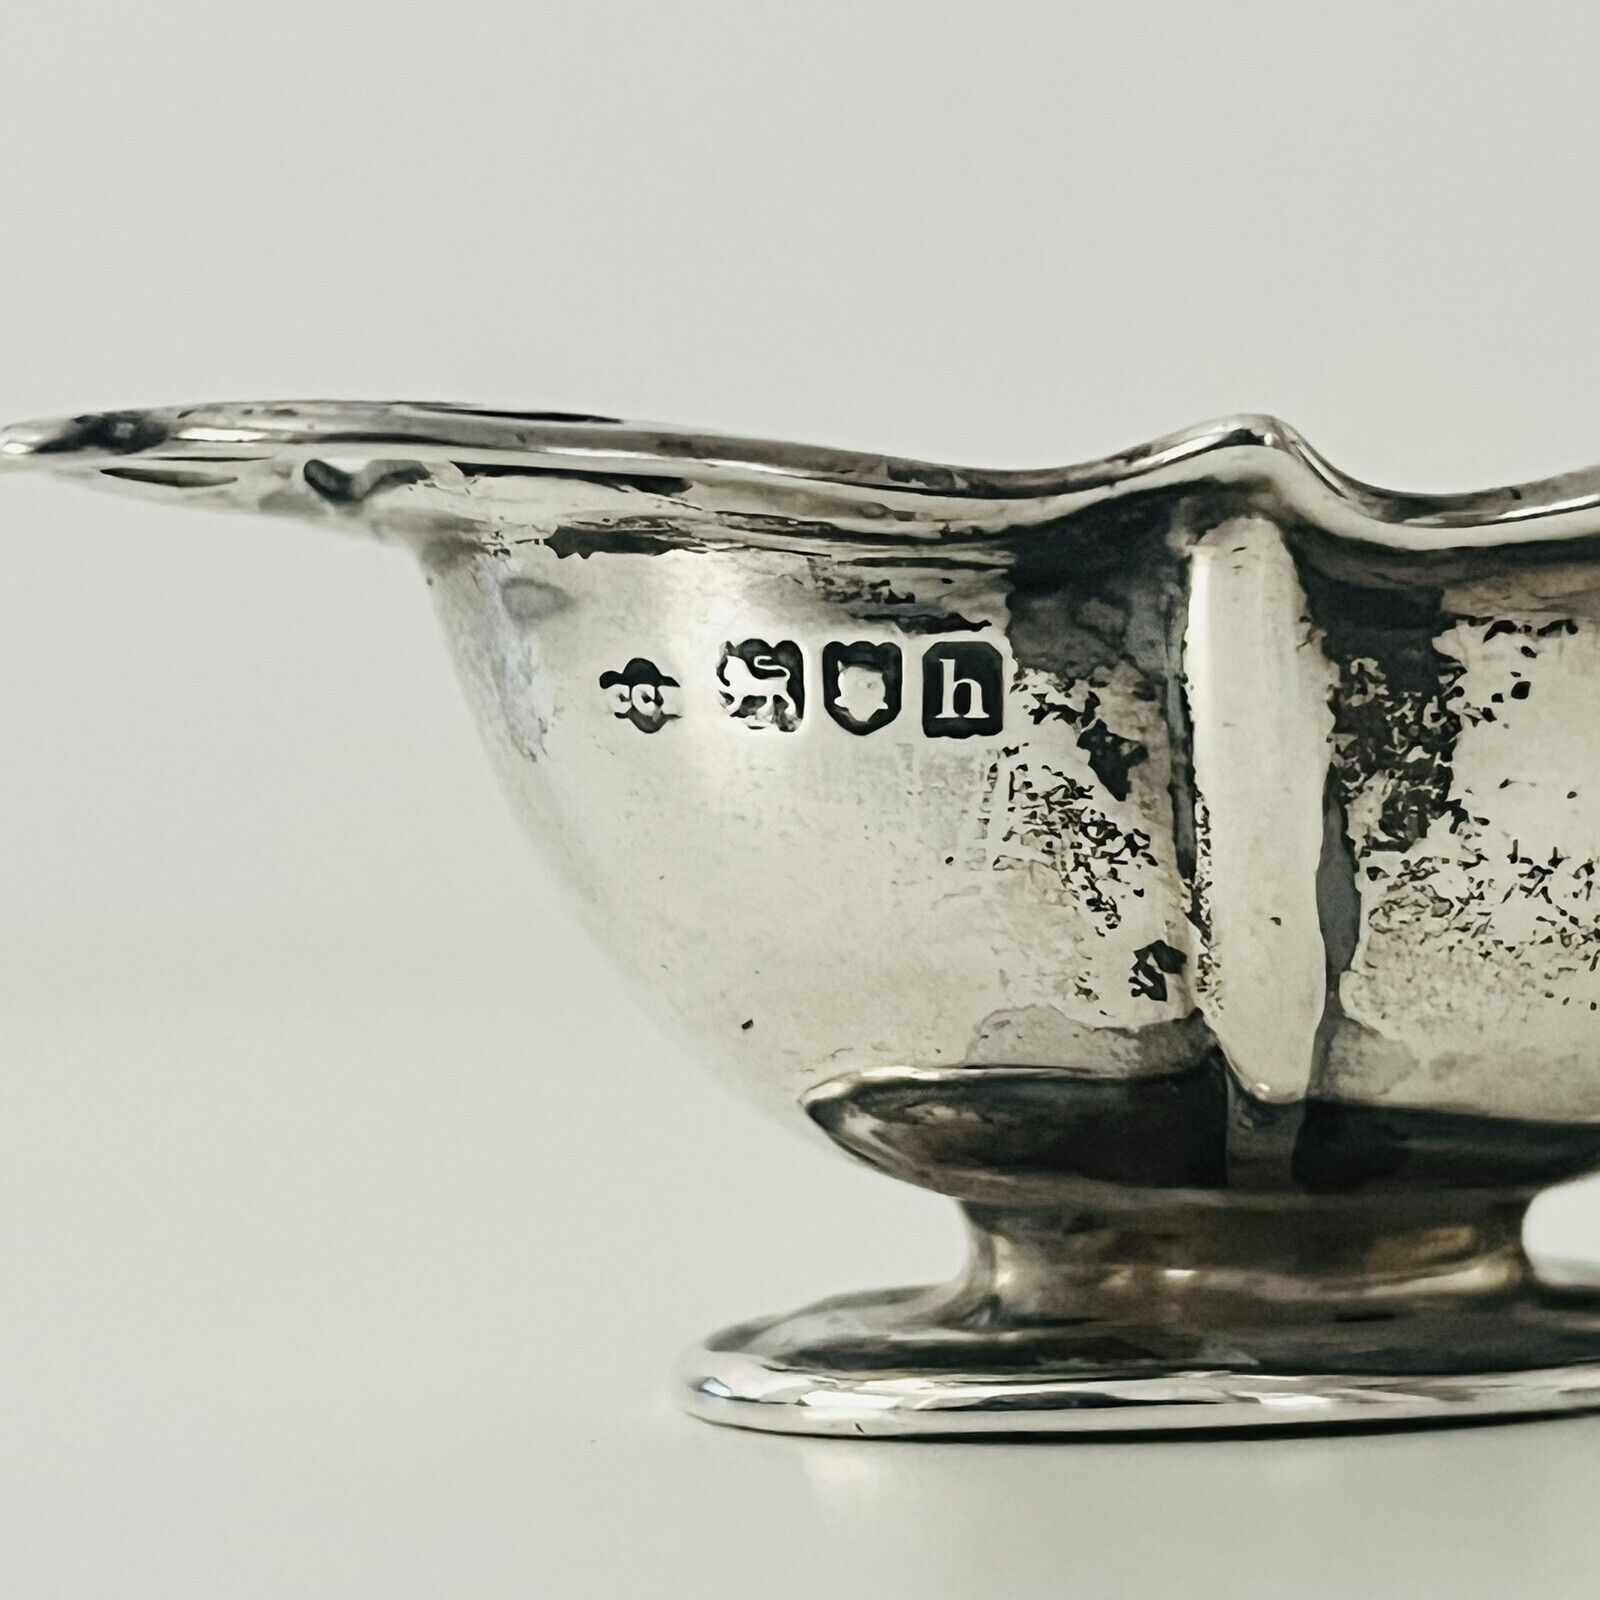 An Antique Edwardian Silver Drinking Cup Quaich, Hallmarked London 1903 - Image 7 of 8